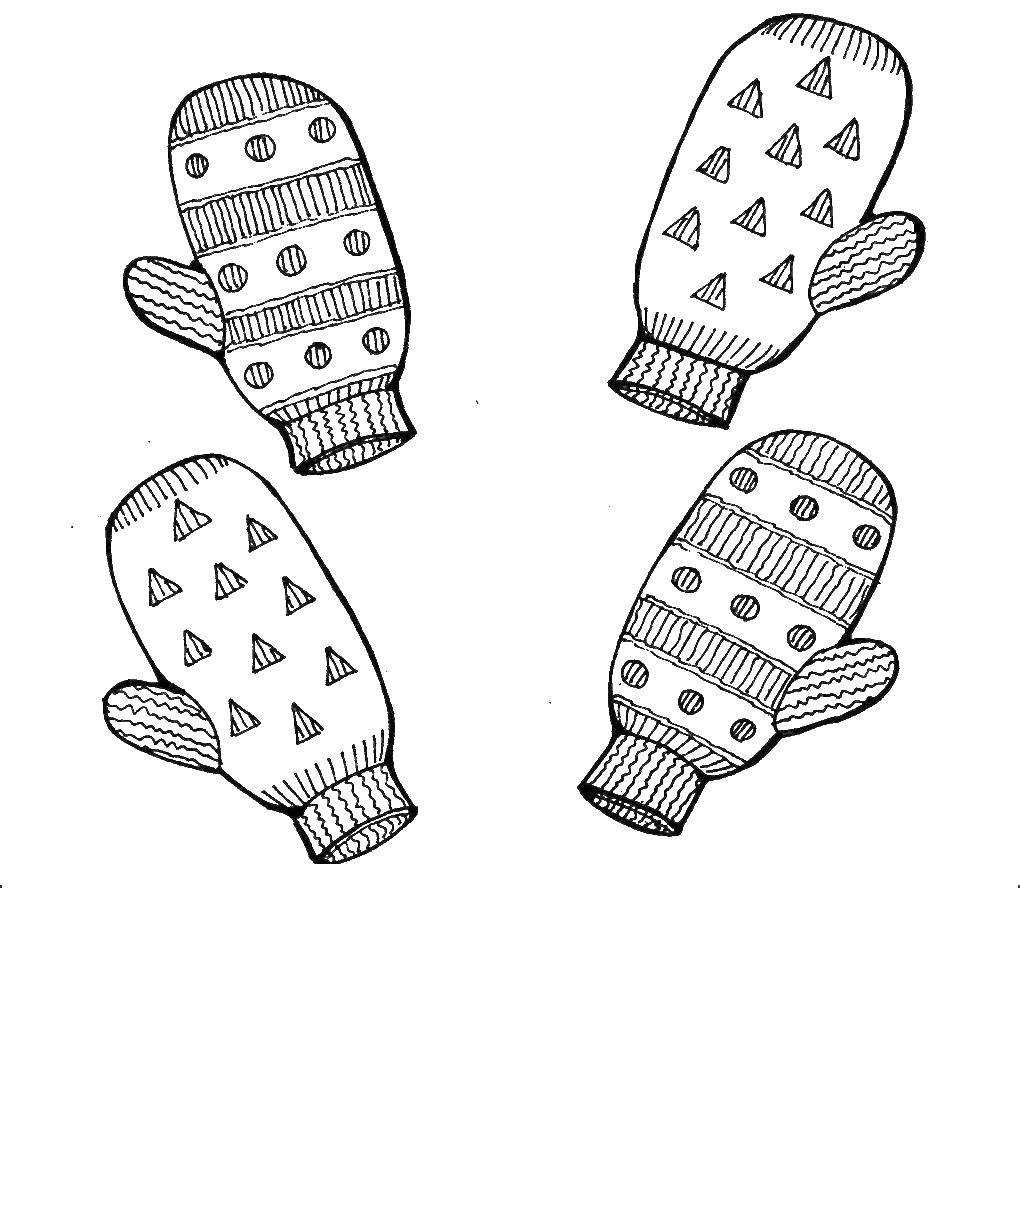 Coloring Mittens with geometric pattern. Category Clothing. Tags:  Clothing, mittens, geometric patterns.